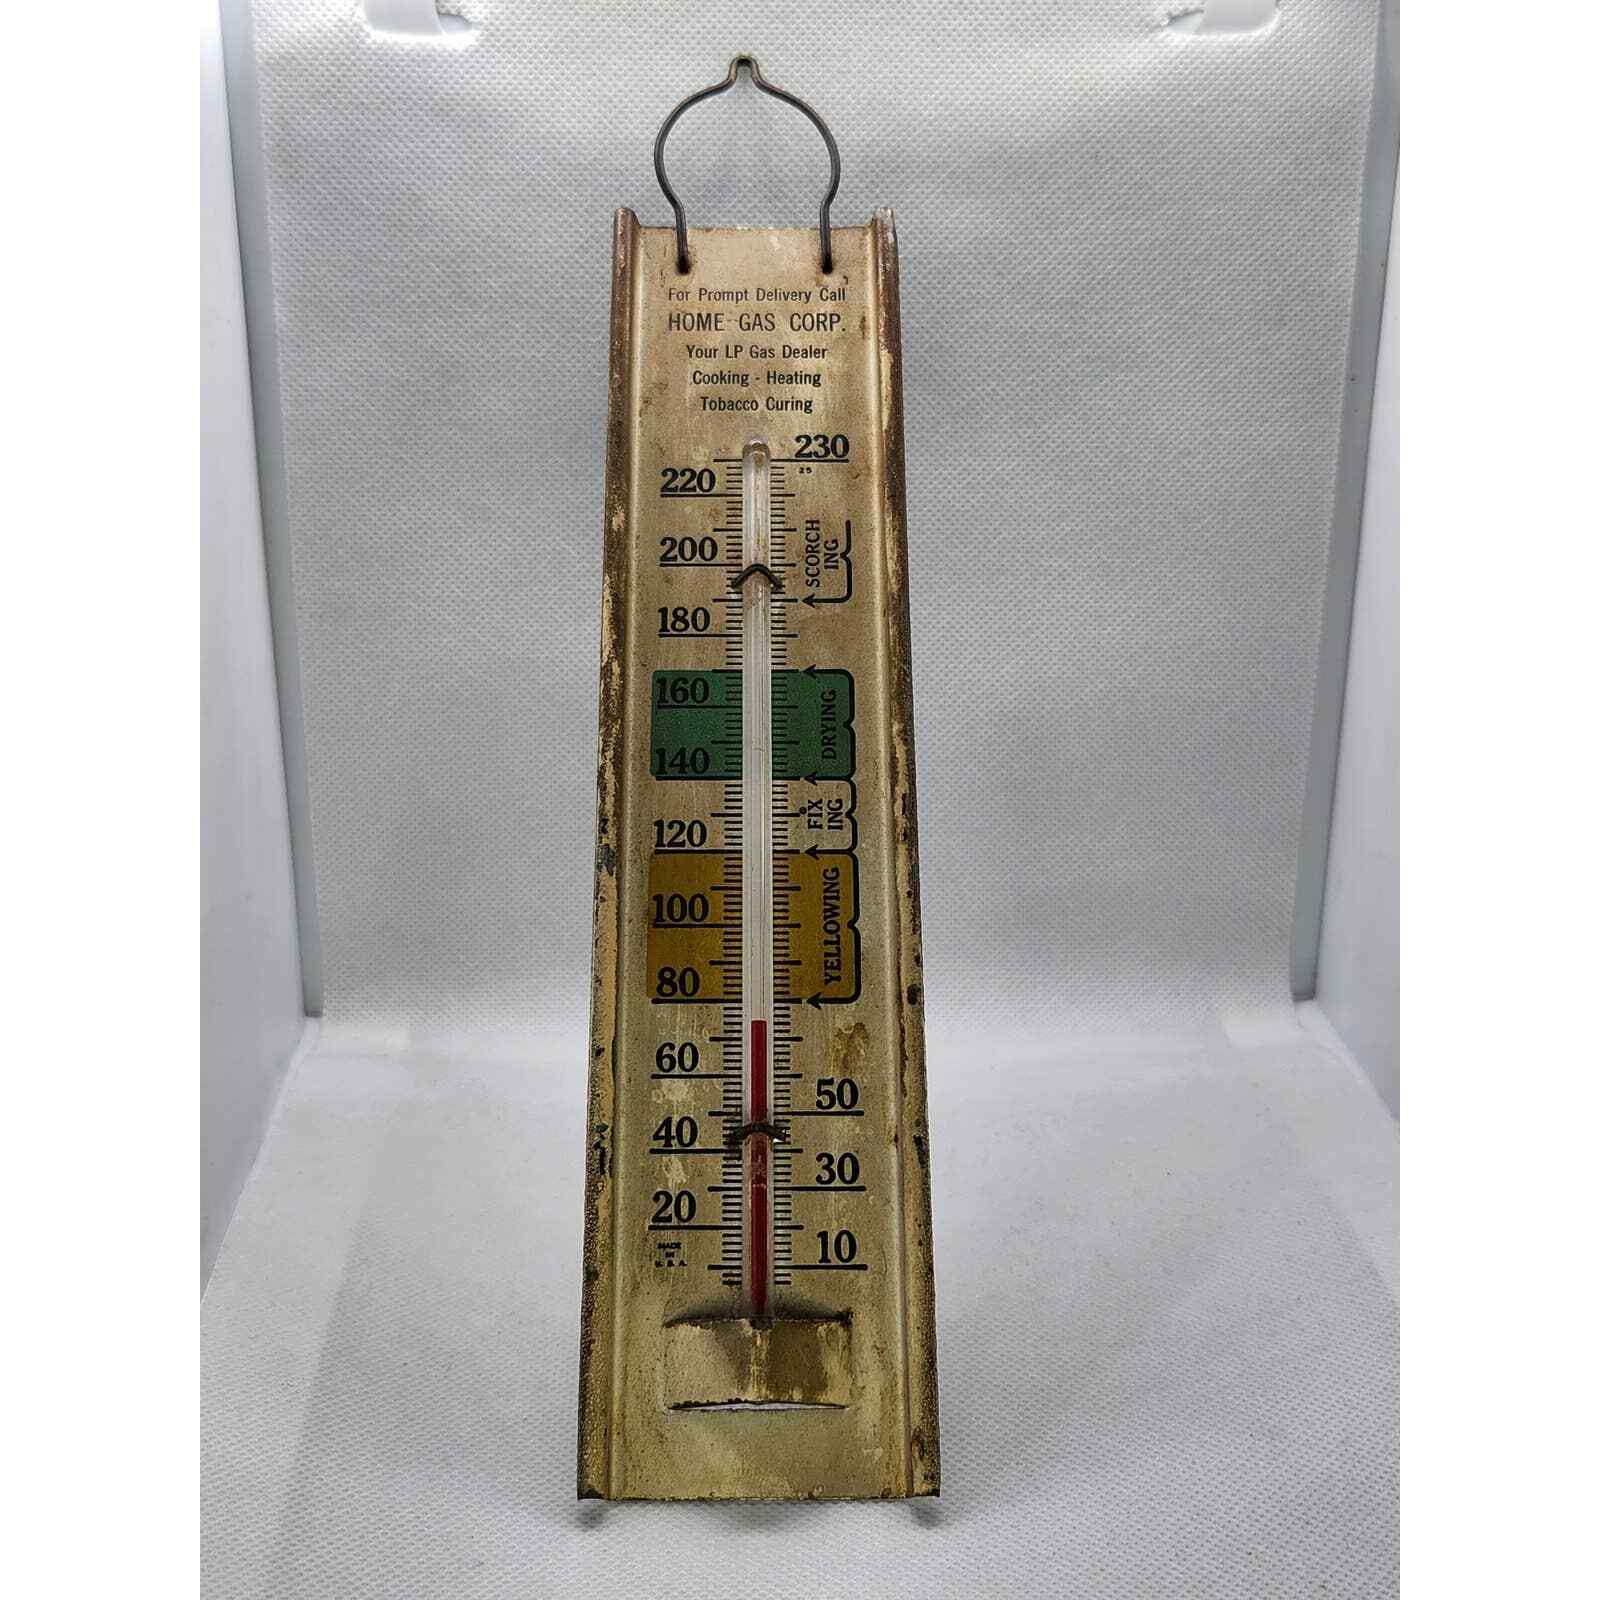 Antique Metal Propane Lp Gas Dealer Thermometer Thermostate Advertisment